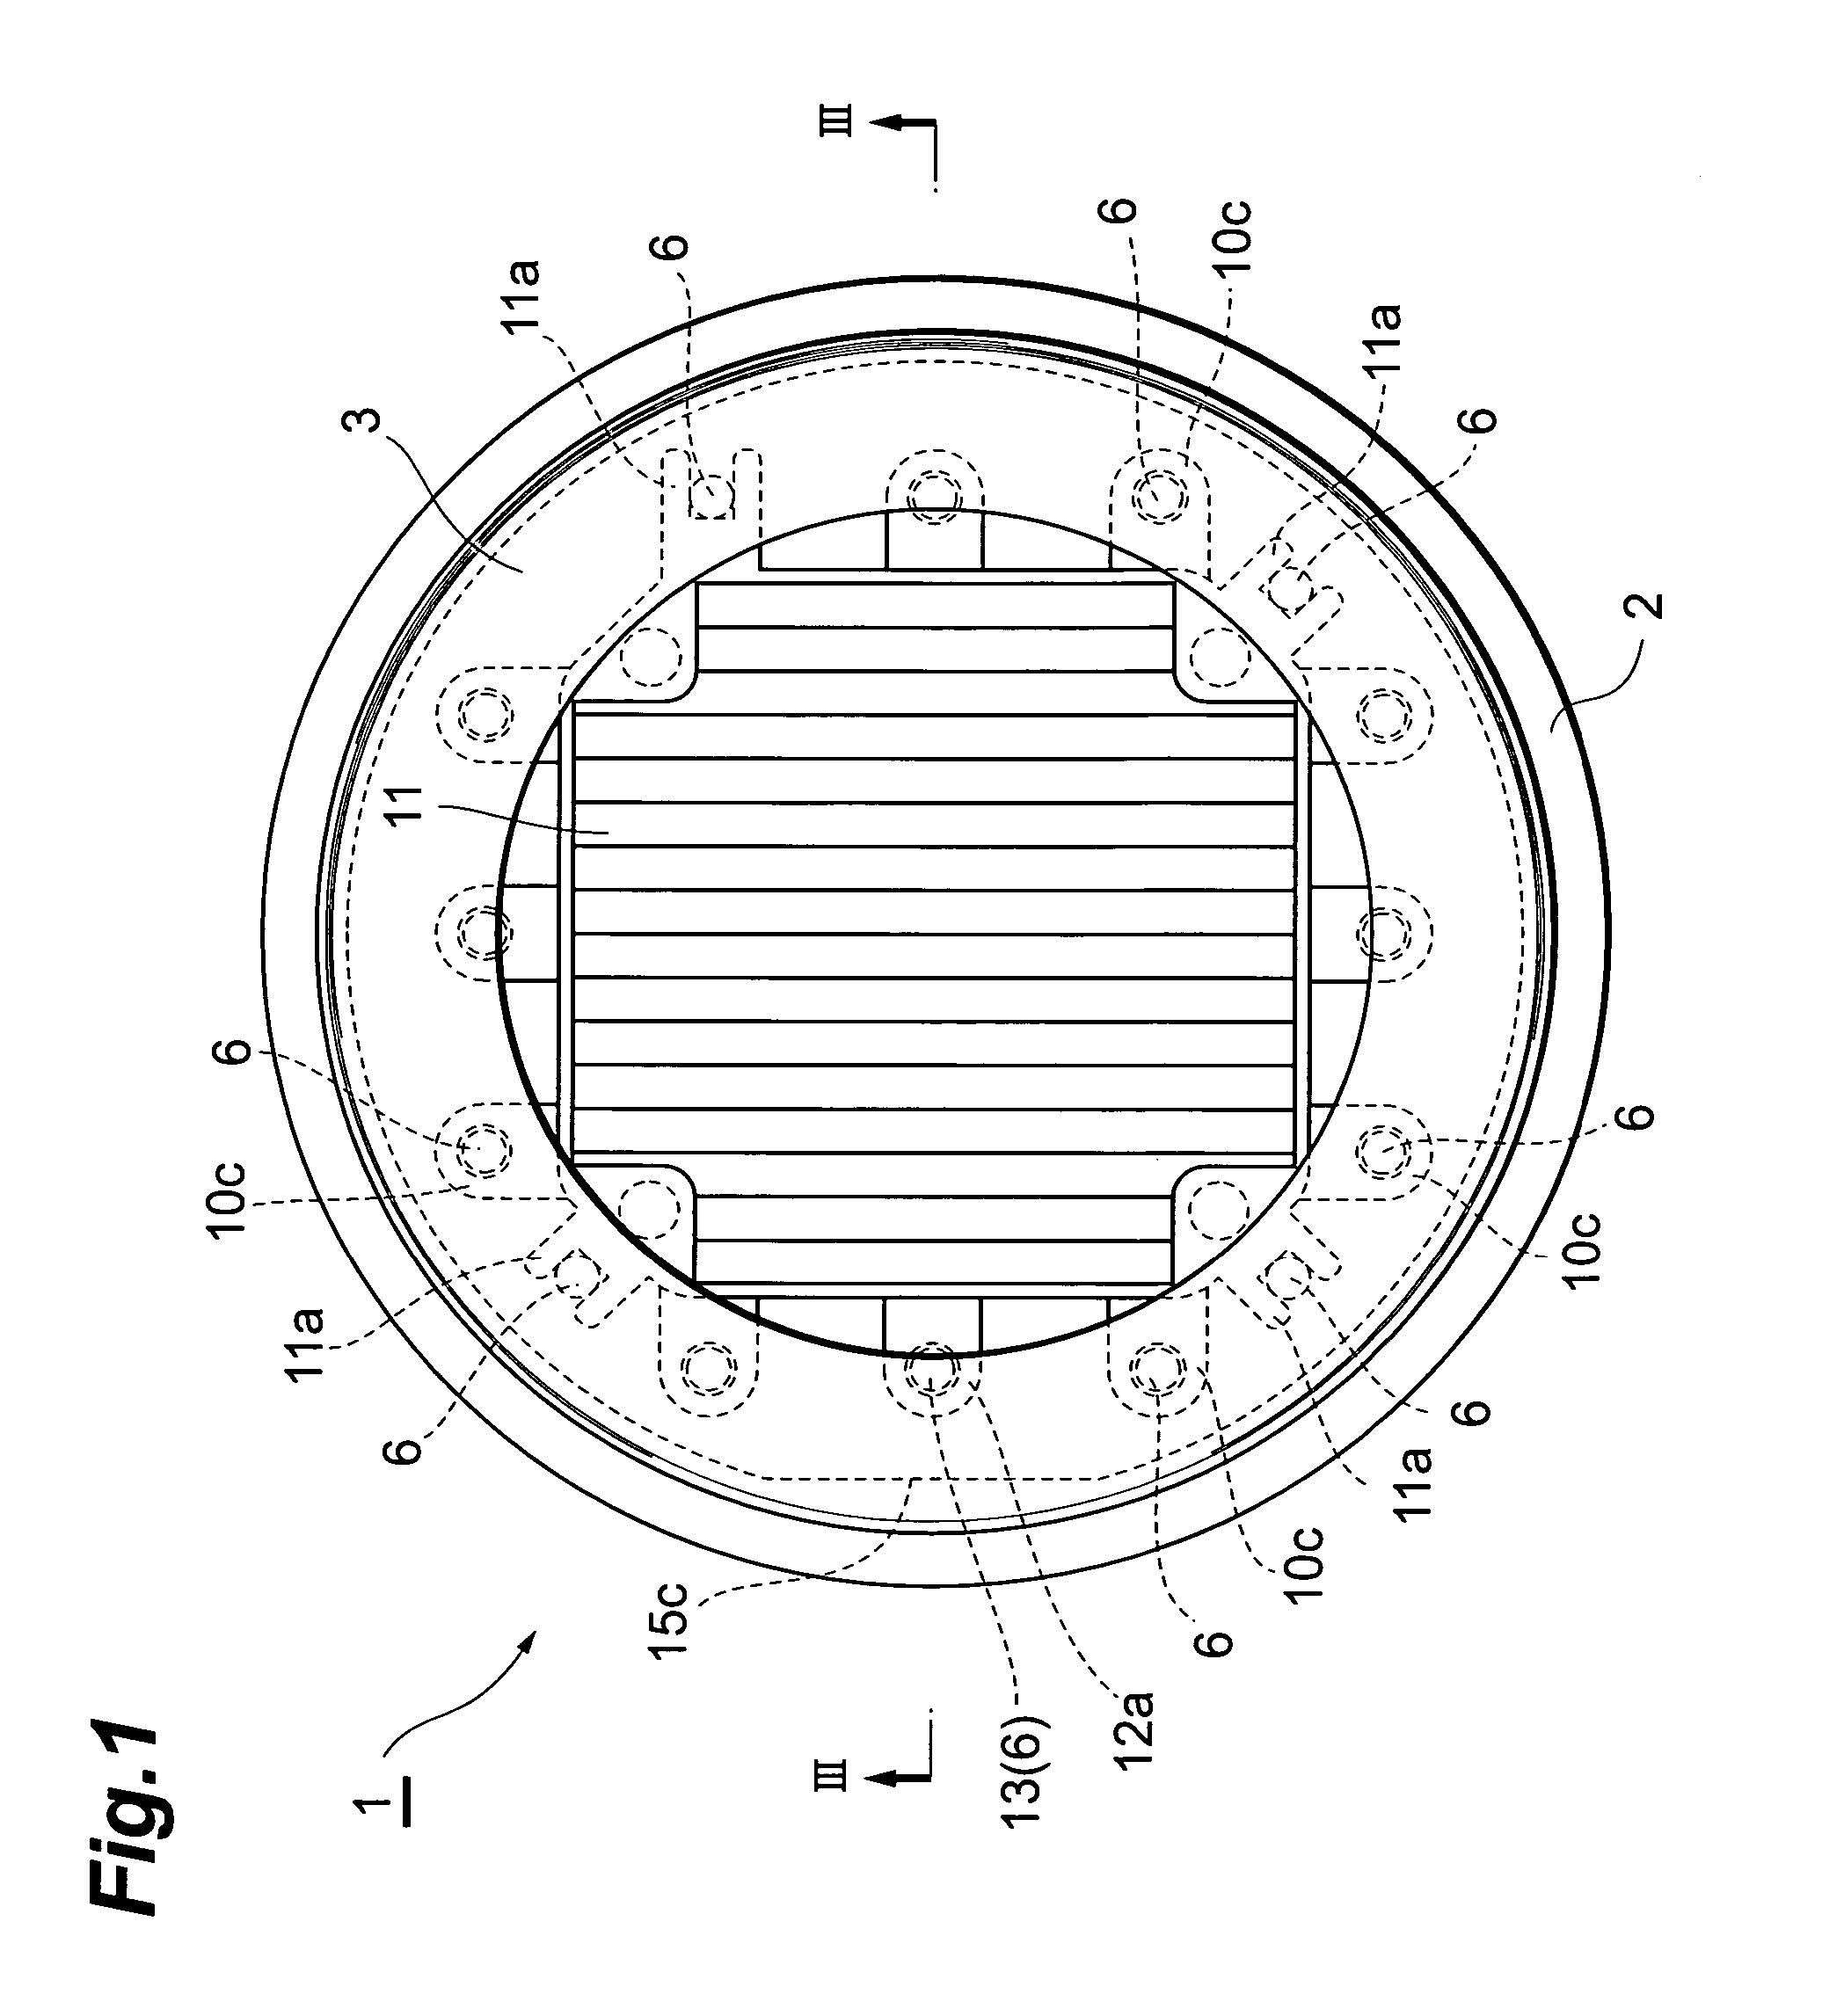 Photomultiplier and radiation detector